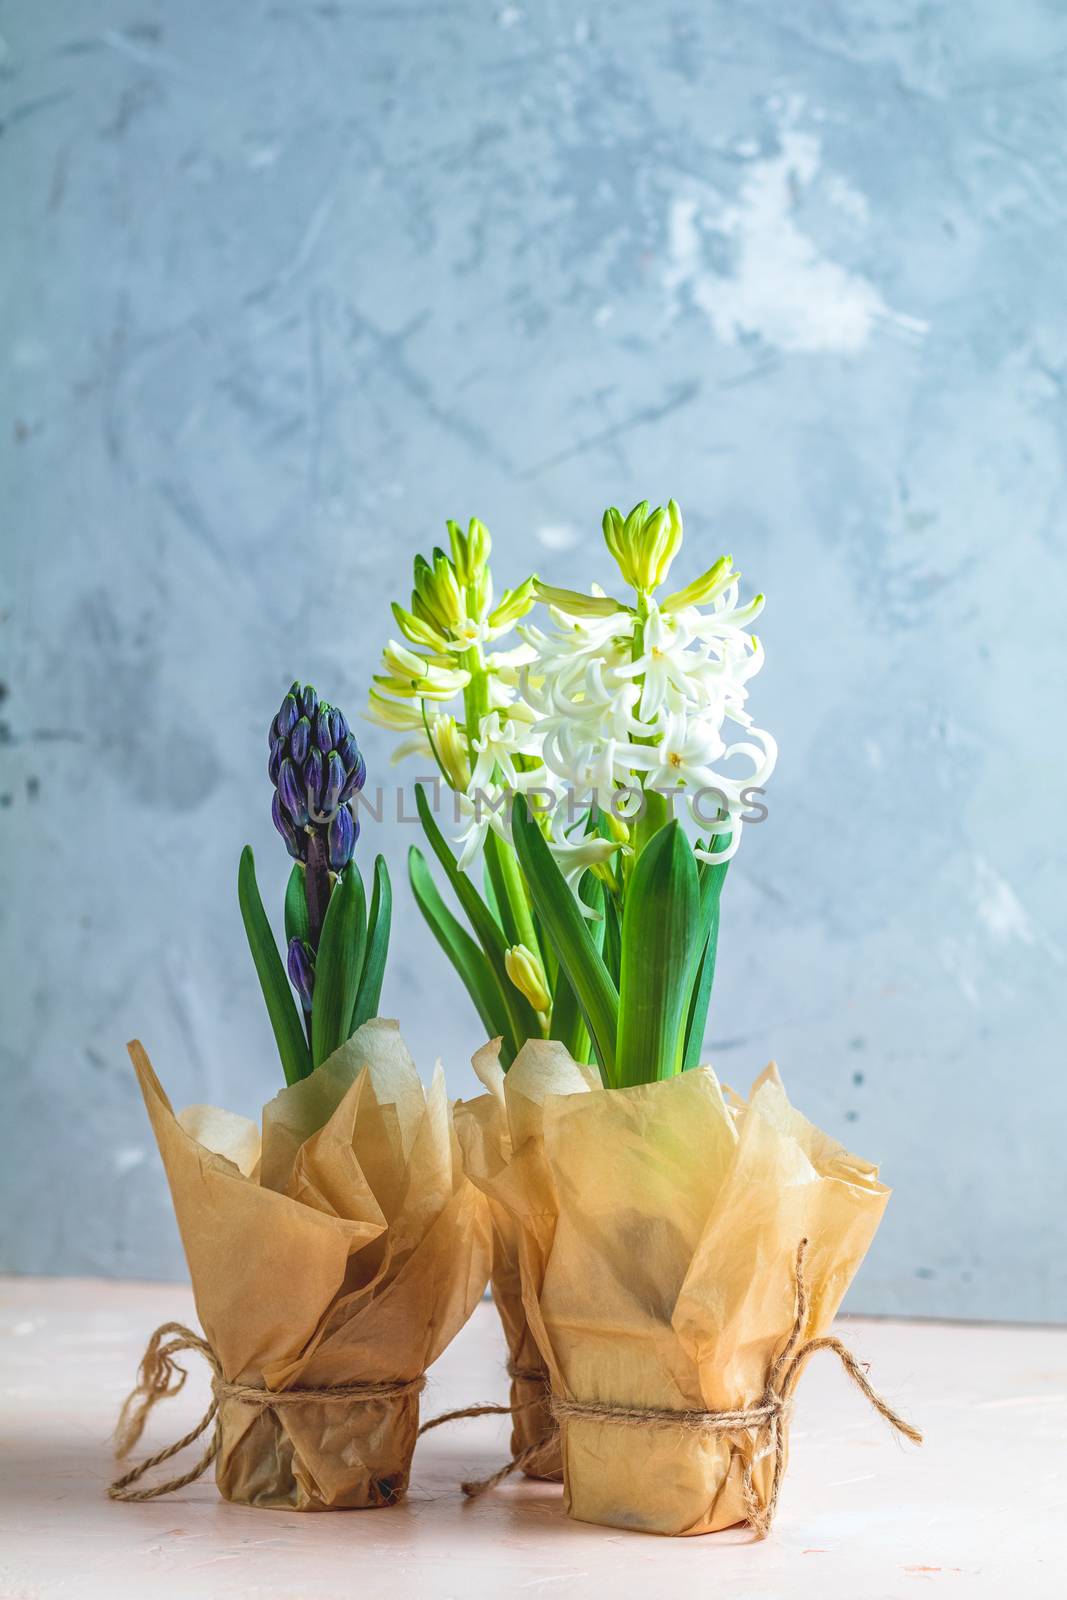 Two white hyacinths and blue hyacinth in pots on pink and blue concrete surface background Minimalism, copy space for you text. Happy Easter, Mothers day, birthday, wedding marriage festive background